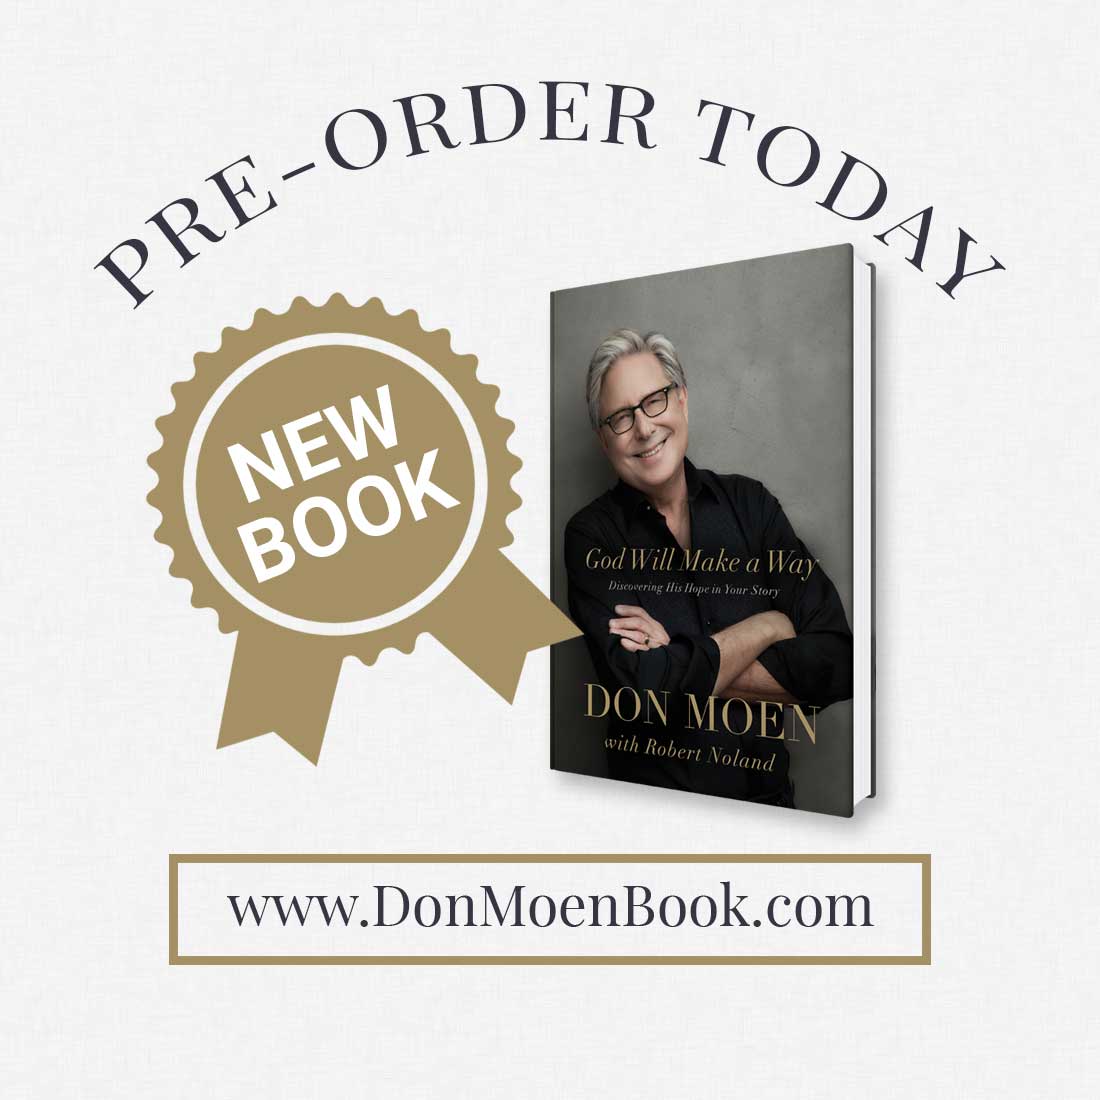 My New Book Available for Pre-Order!